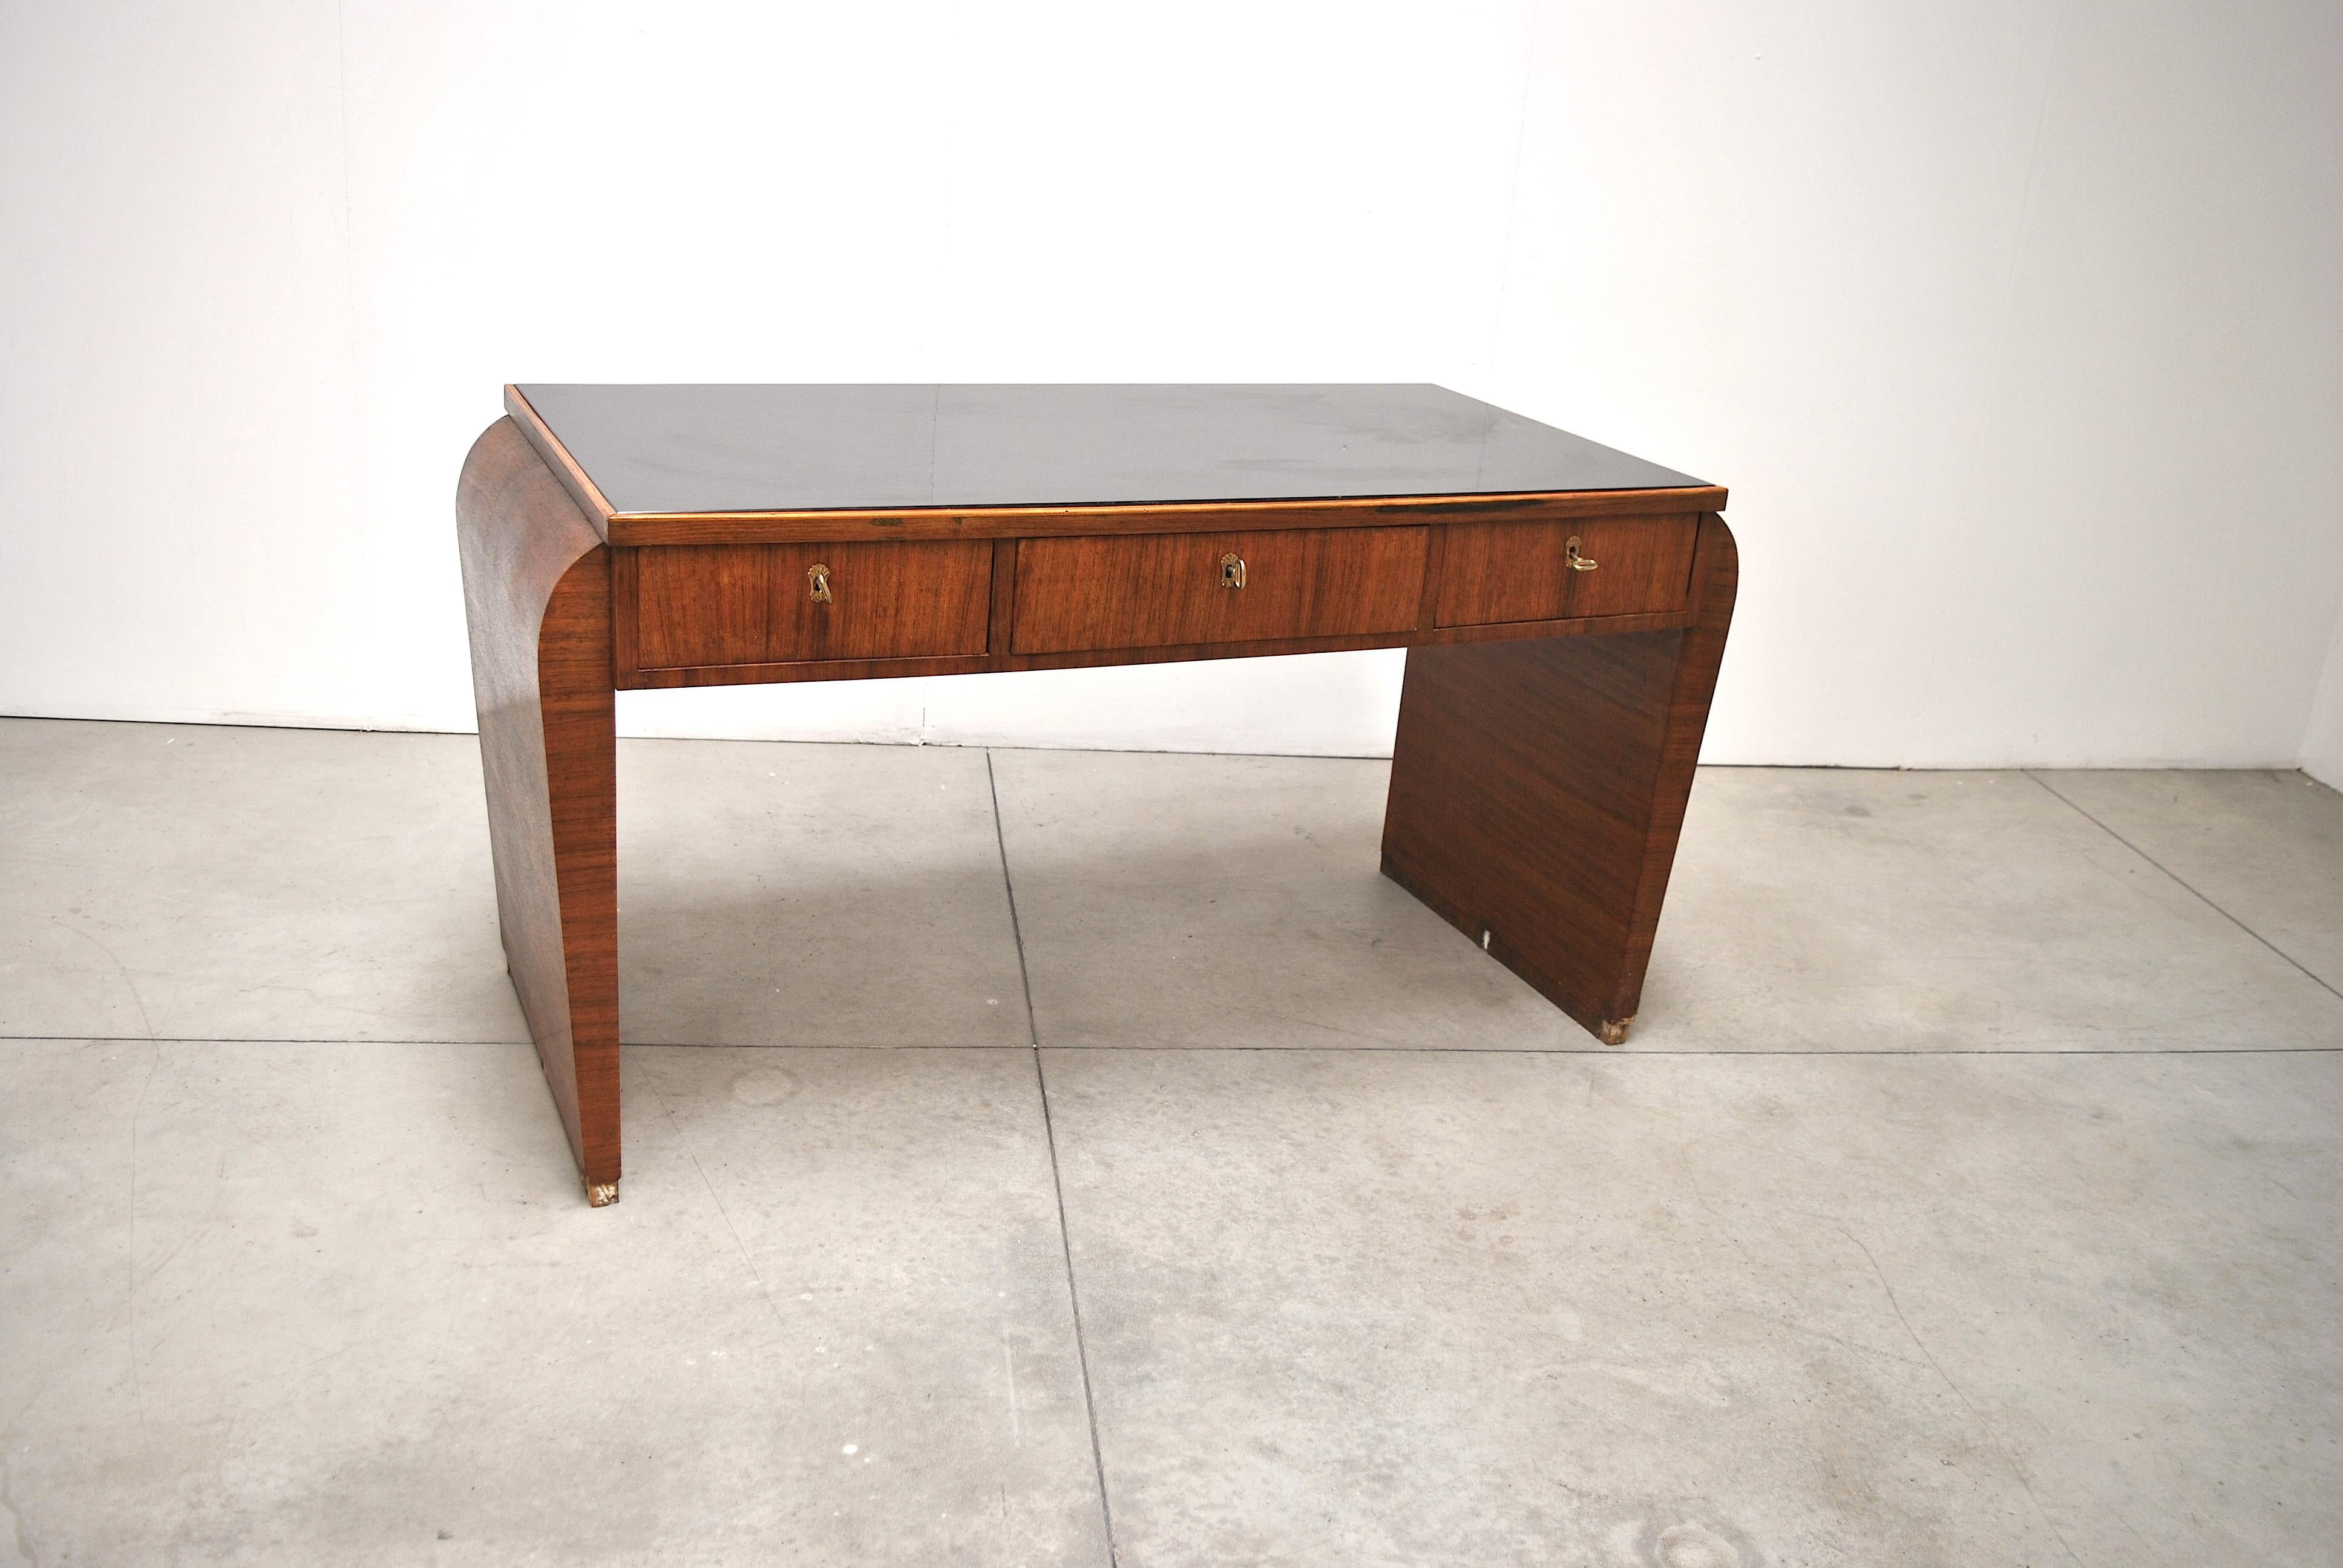 Wood Midcentury Italian Rationalist Writing Table with Brass Finishes, 1930s